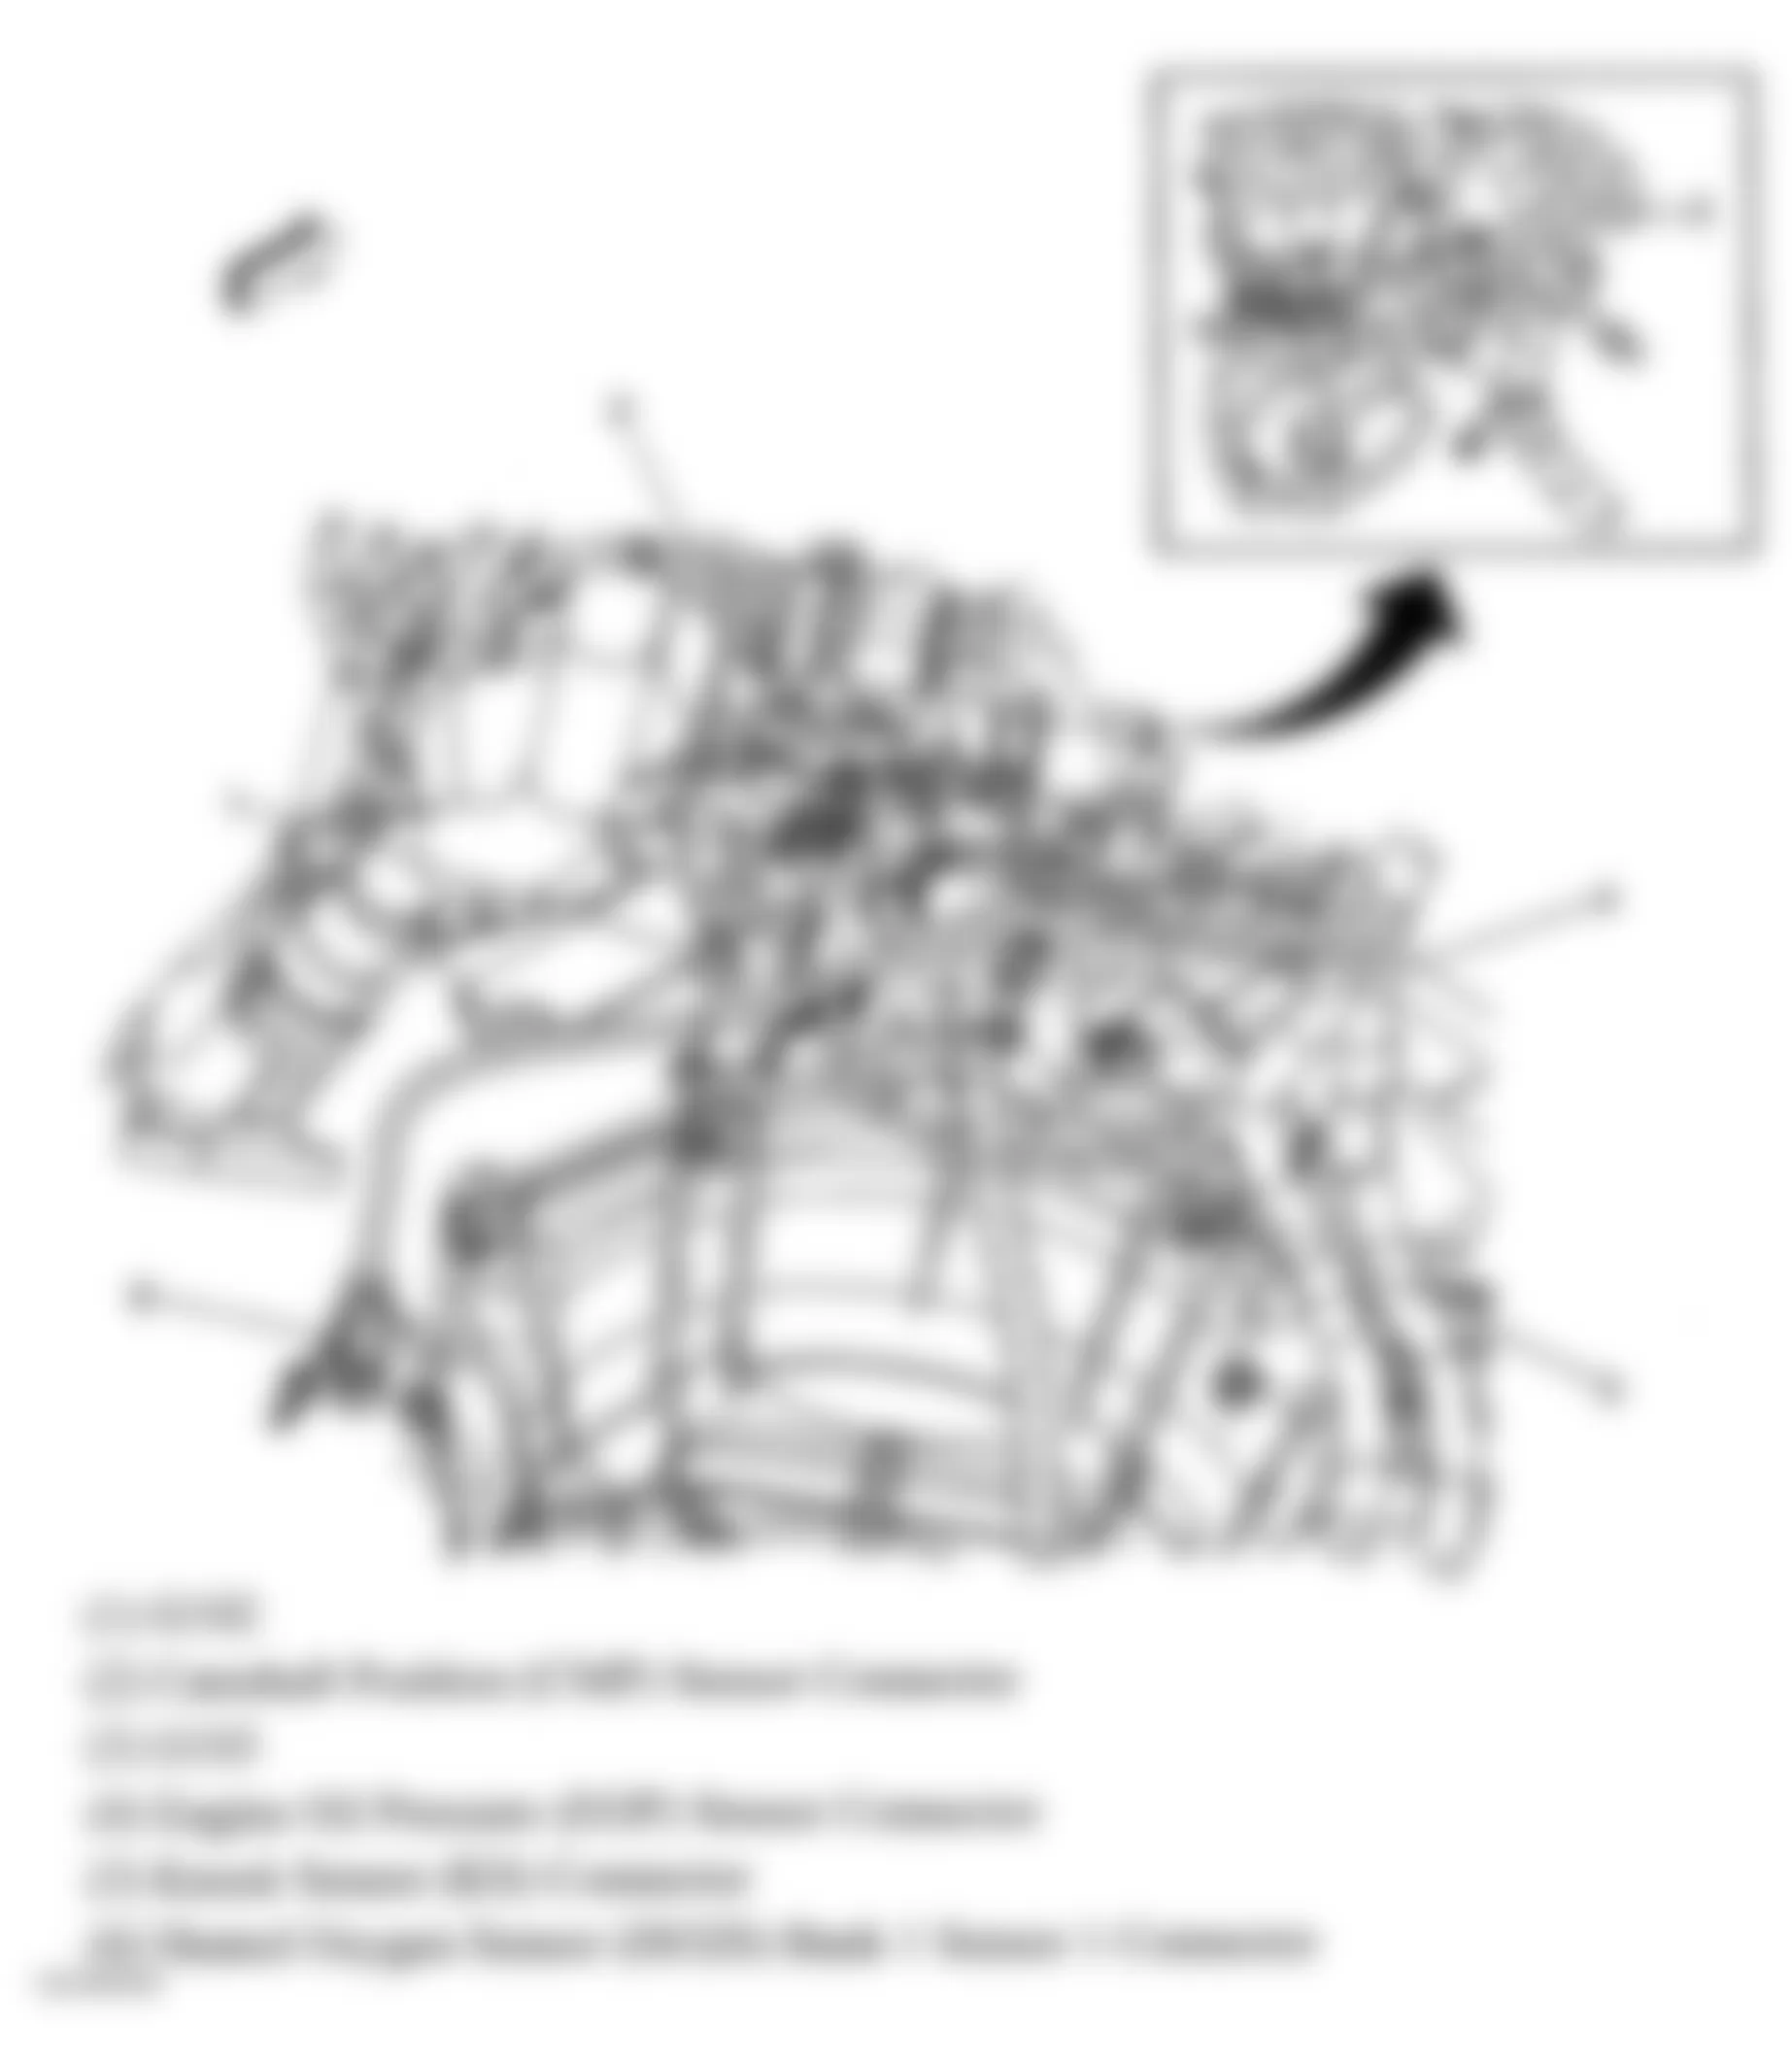 GMC Savana Special G3500 2007 - Component Locations -  Rear Of Engine (4.3L)